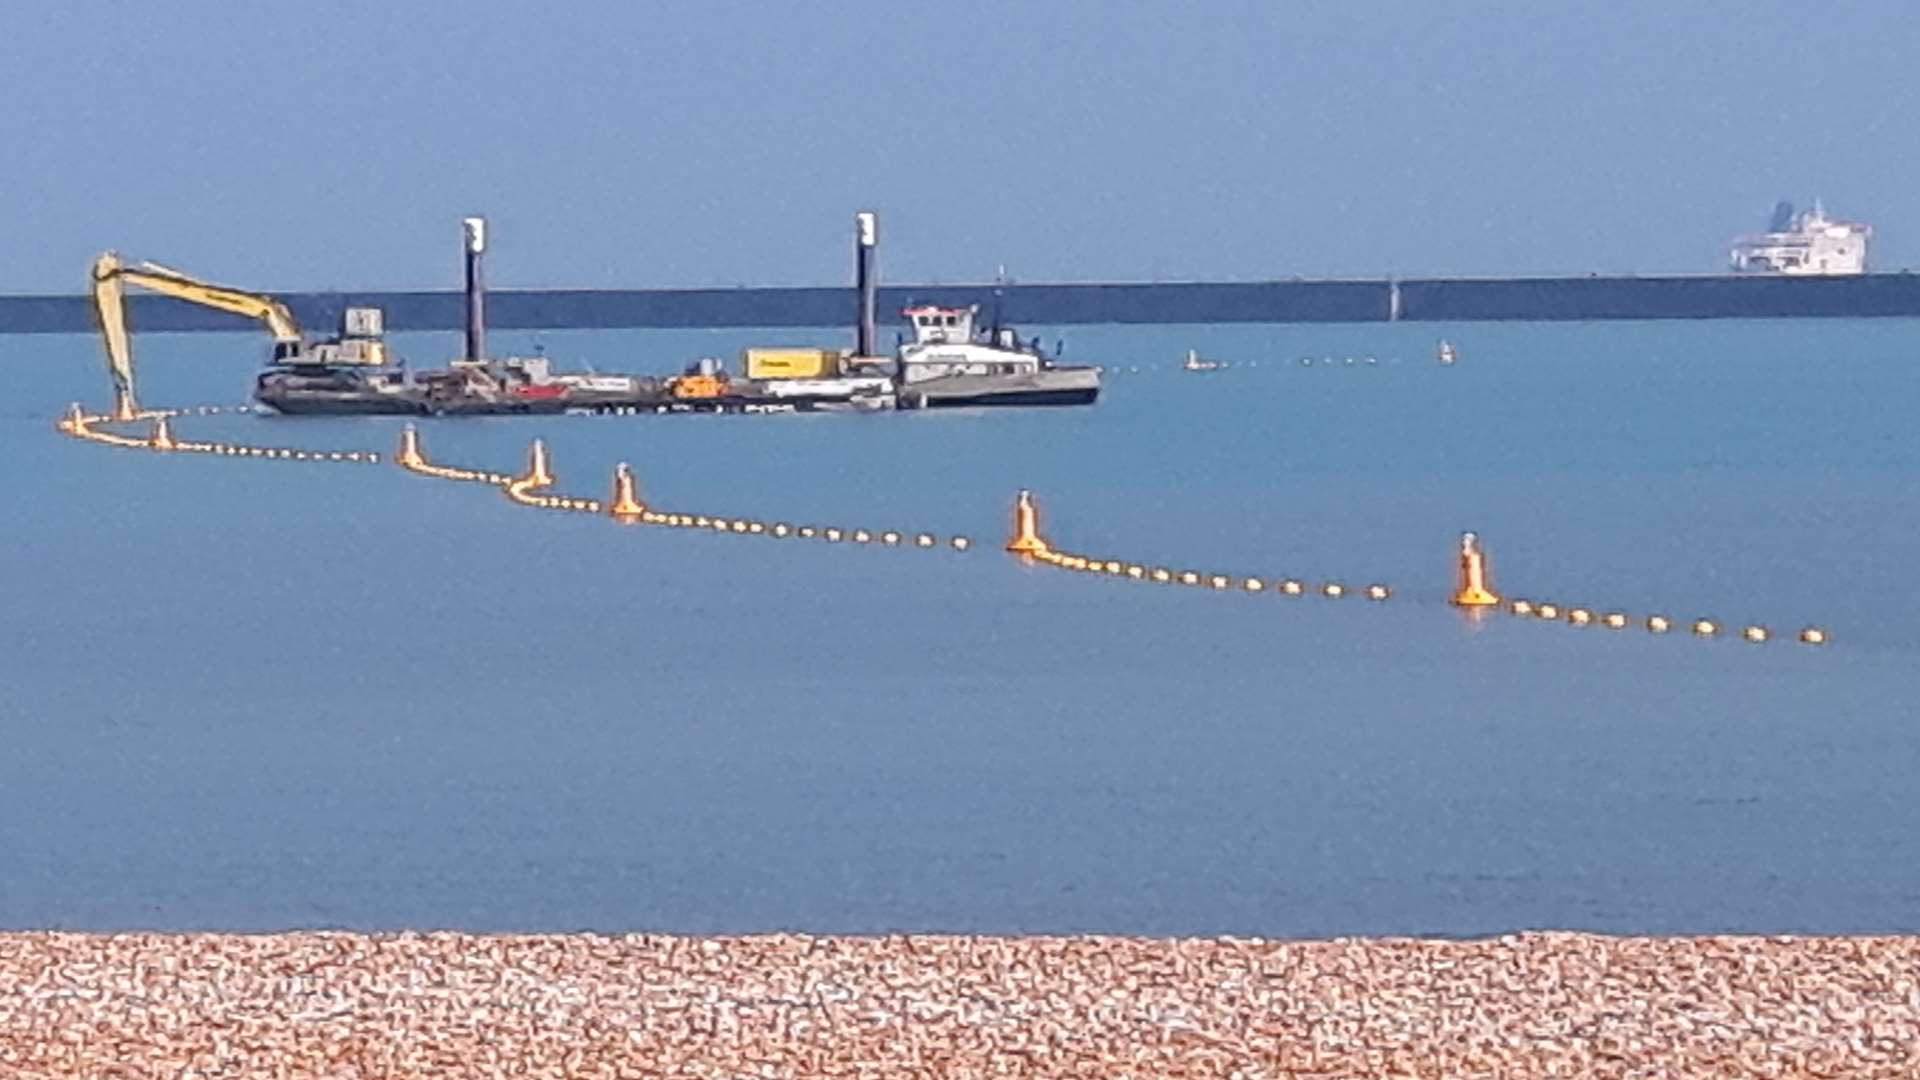 Dredging for the Western Docks development already taking place at Dover Harbour.